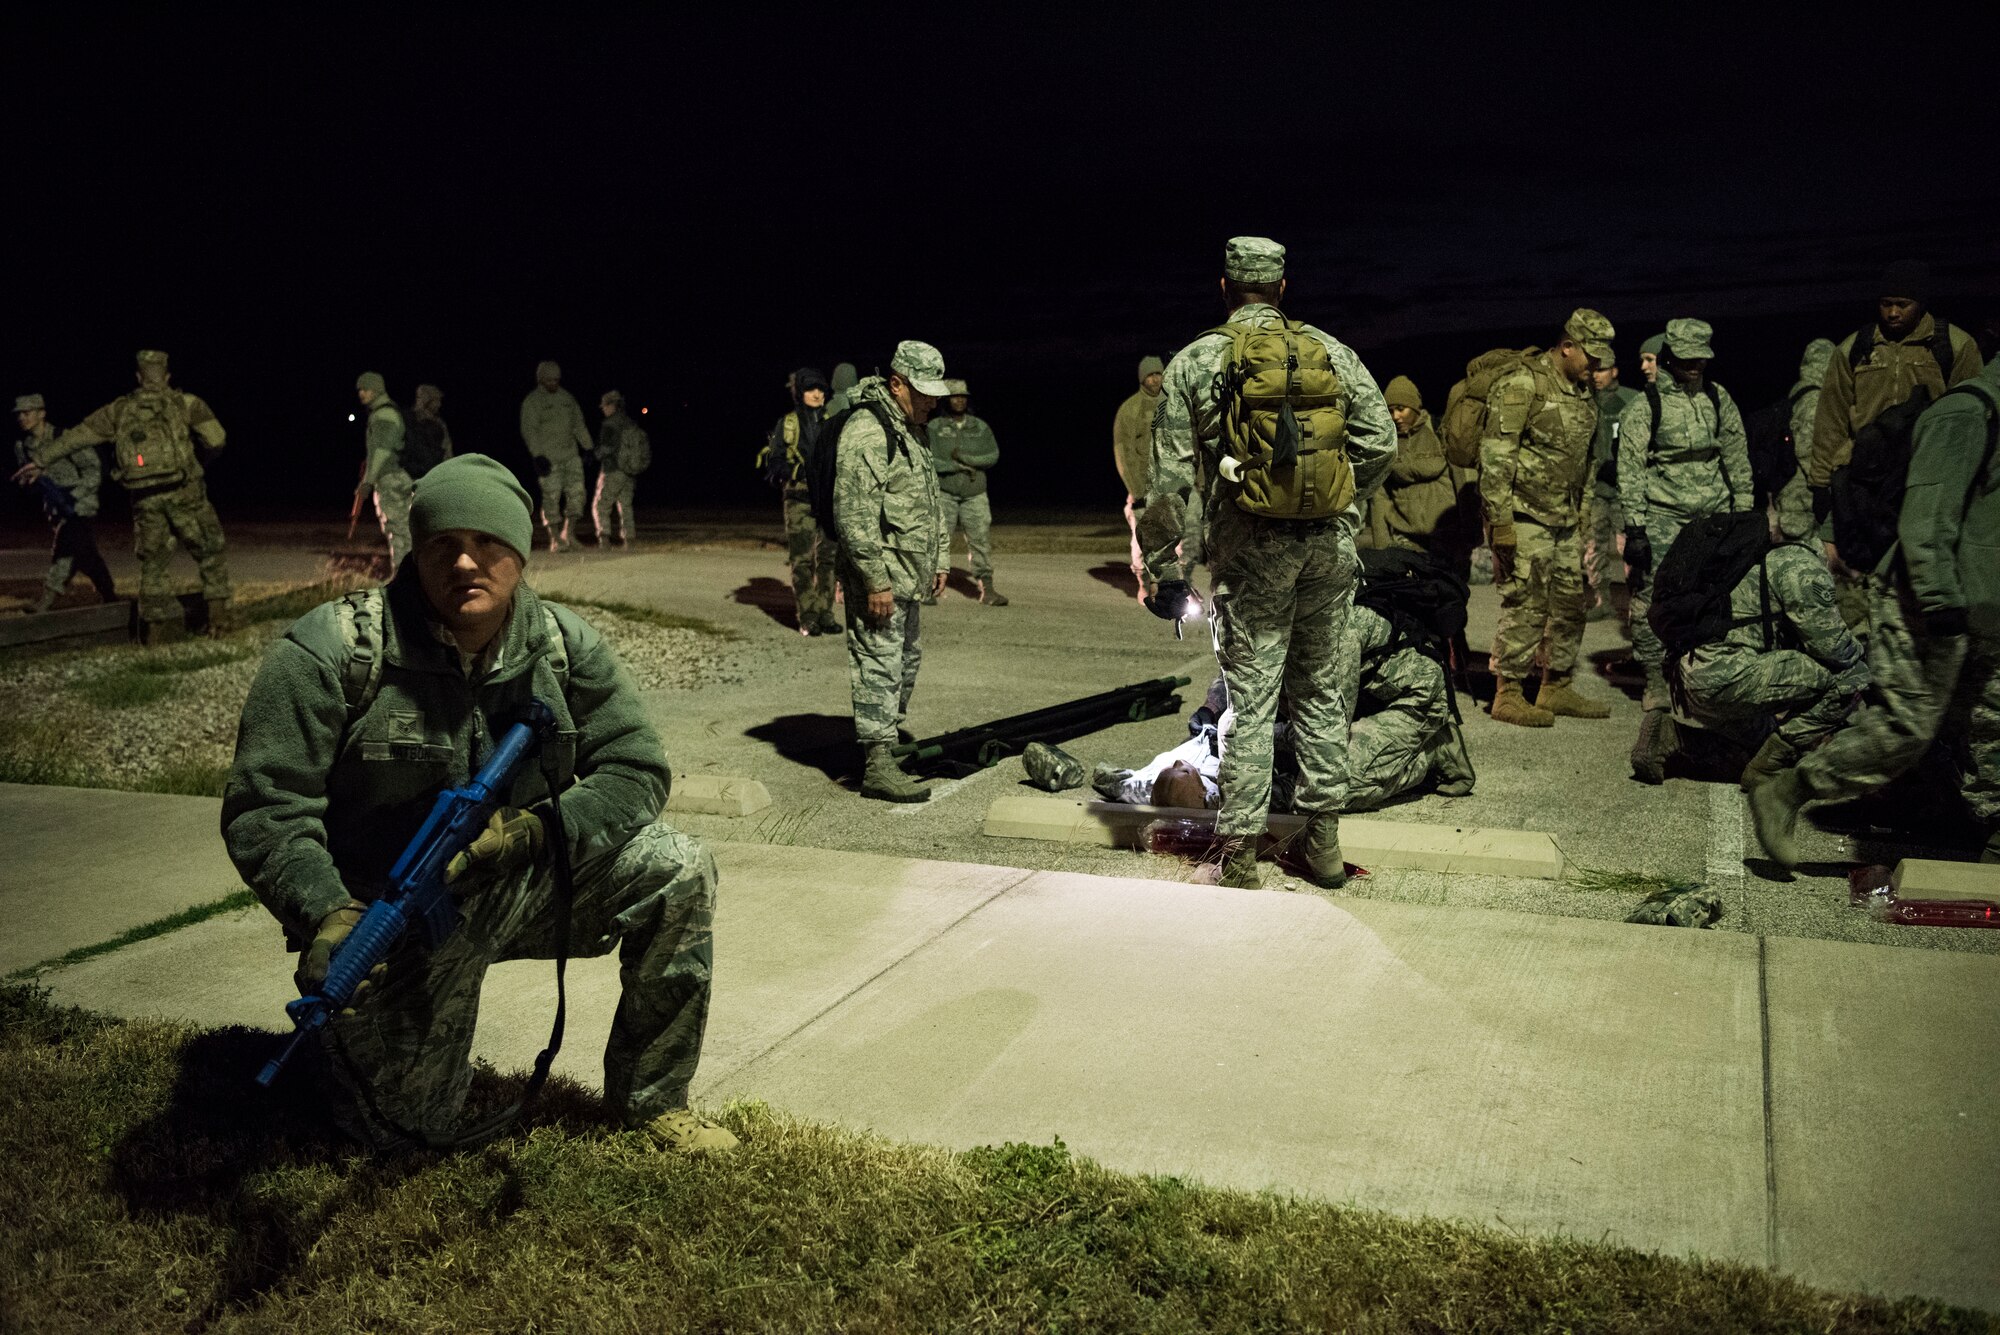 Staff Sgt. Matthew Watson, a 47th Operational Medical Readiness Squadron medical technician, guards a unit giving medical care during a readiness exercise at Laughlin Air Force Base, Texas, Oct. 25, 2019. One aspect the team trained on was setting up 360 degree perimeter security to protect anyone giving medical care from adversaries. (U.S. Air Force photo by Senior Airman Marco A. Gomez)